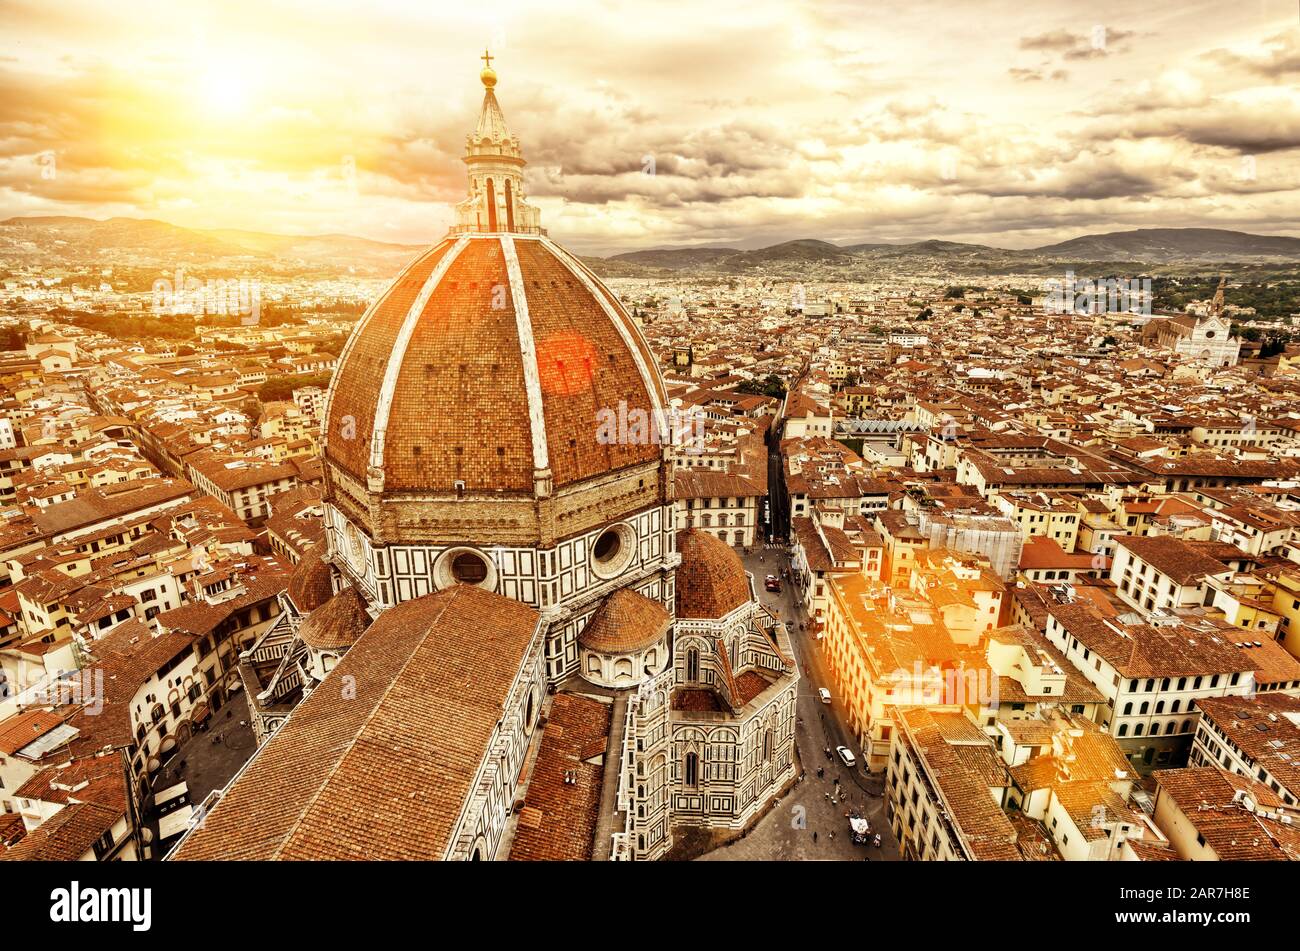 Florence sunny view, Italy. The Basilica di Santa Maria del Fiore (Basilica of Saint Mary of the Flower) in the foreground. Stock Photo